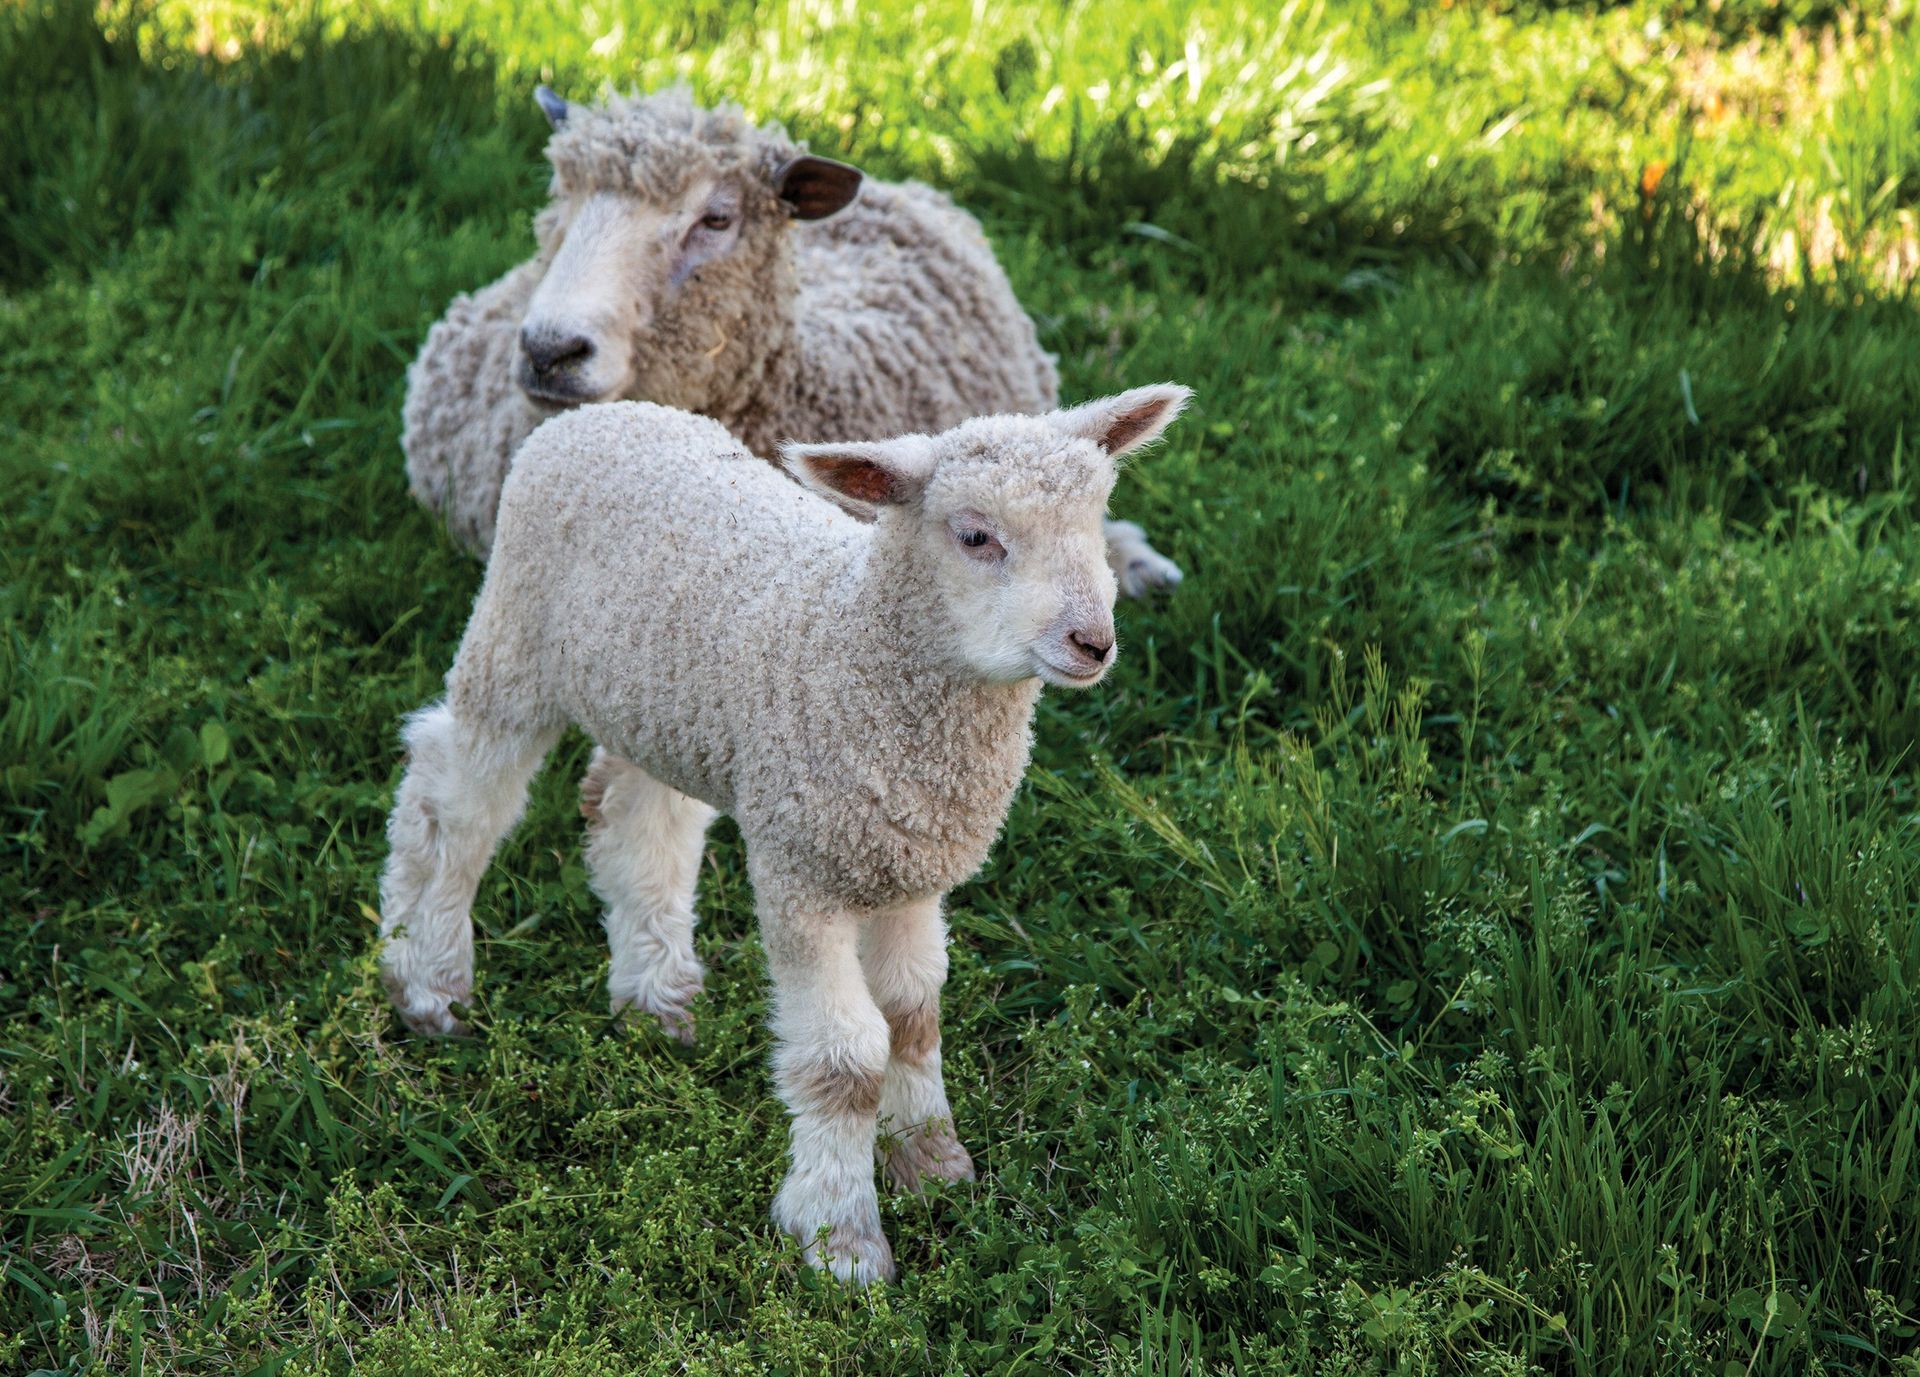 A small lamb standing next to its mother.